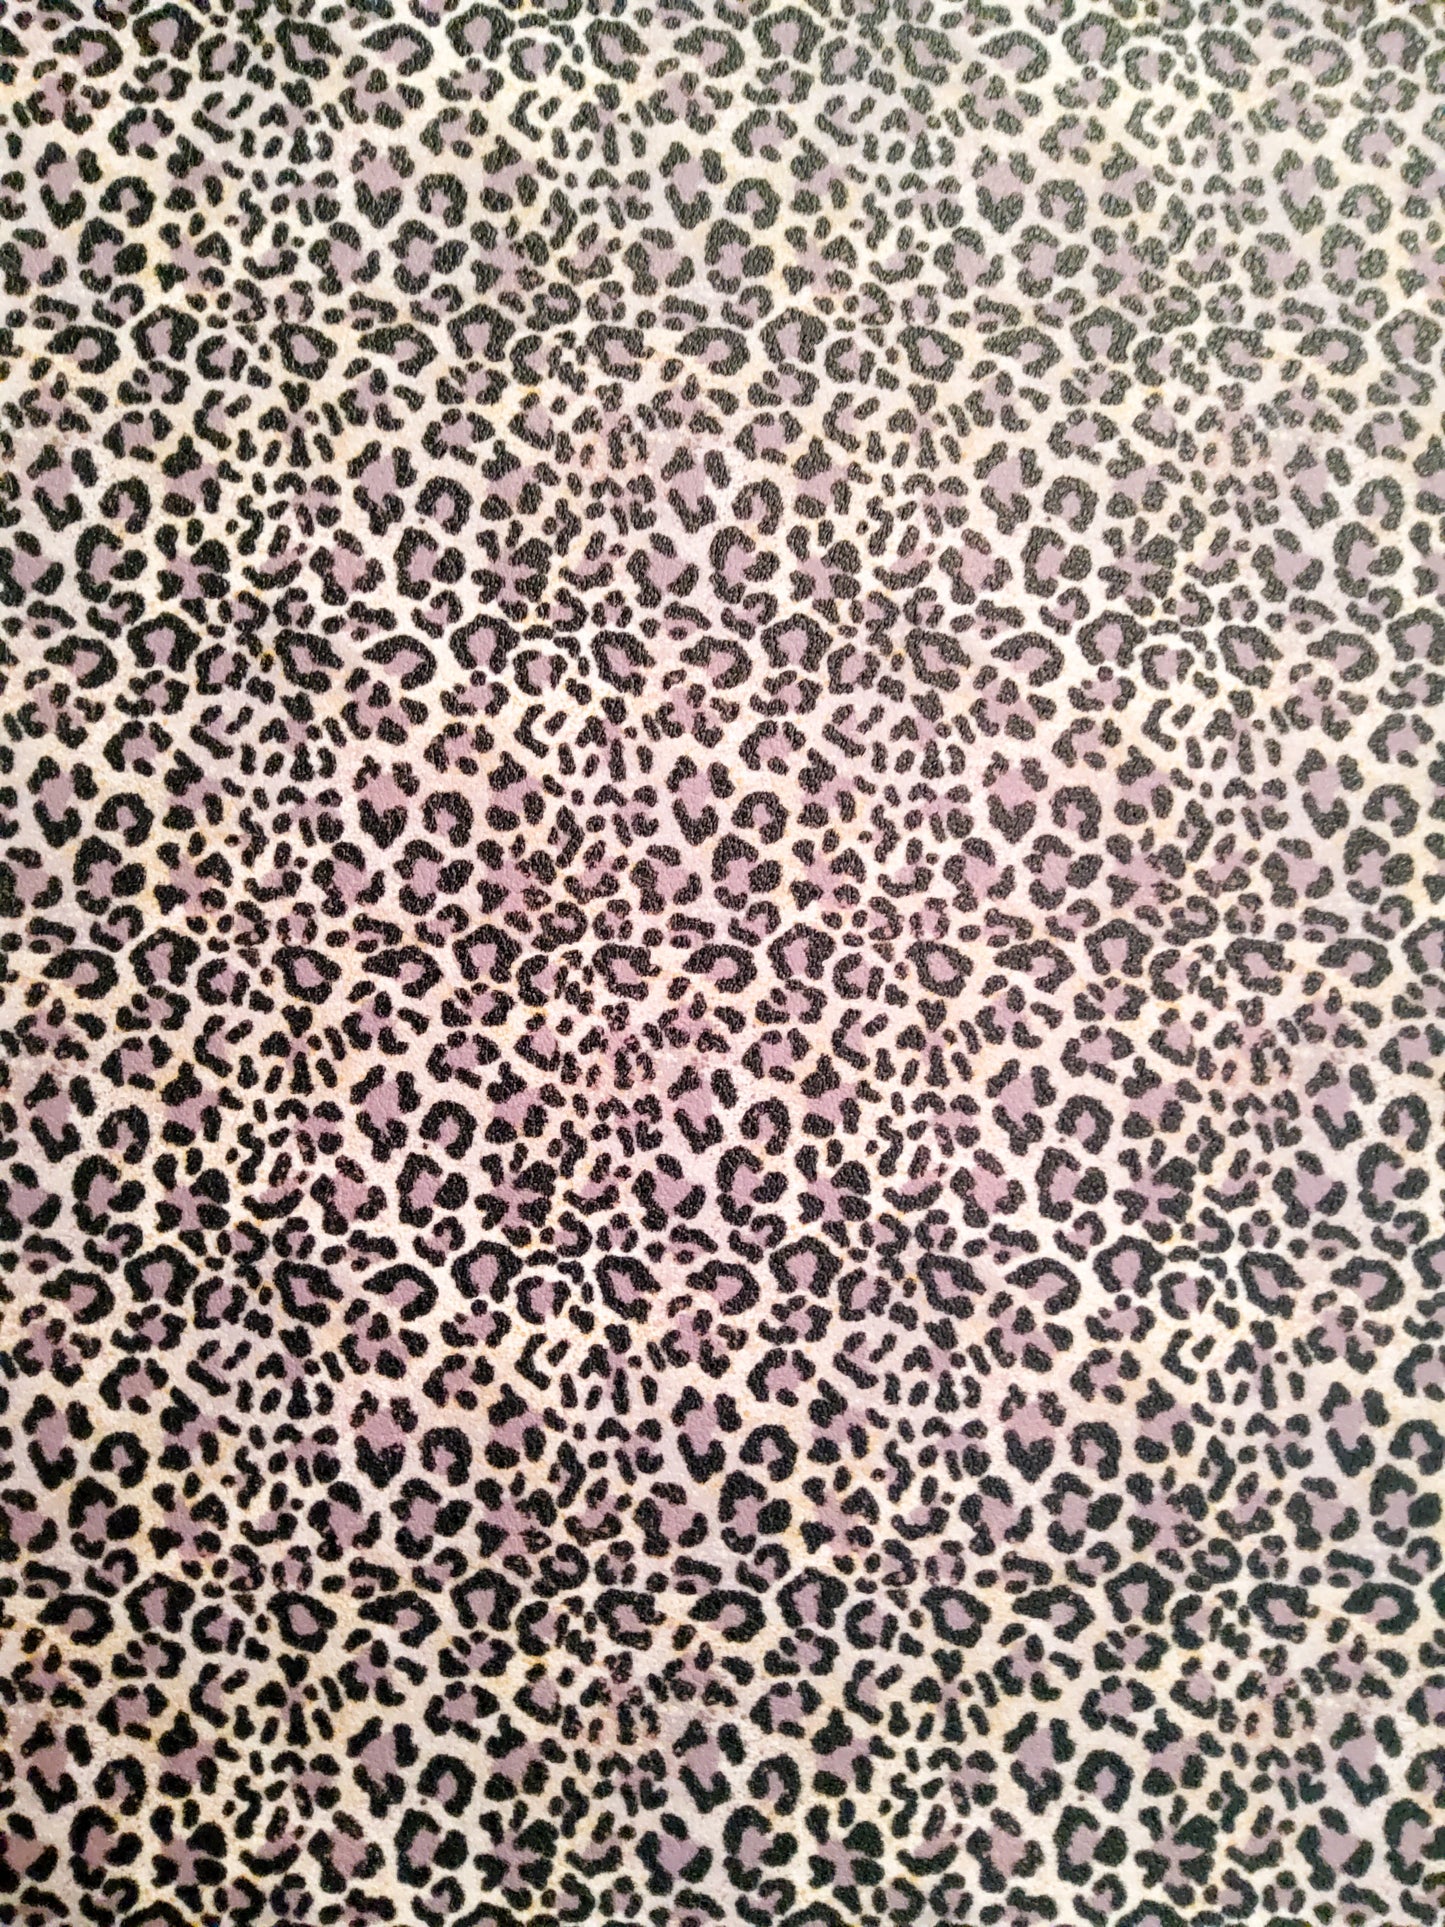 Muted Brown Animal Print 9x12 faux leather sheet